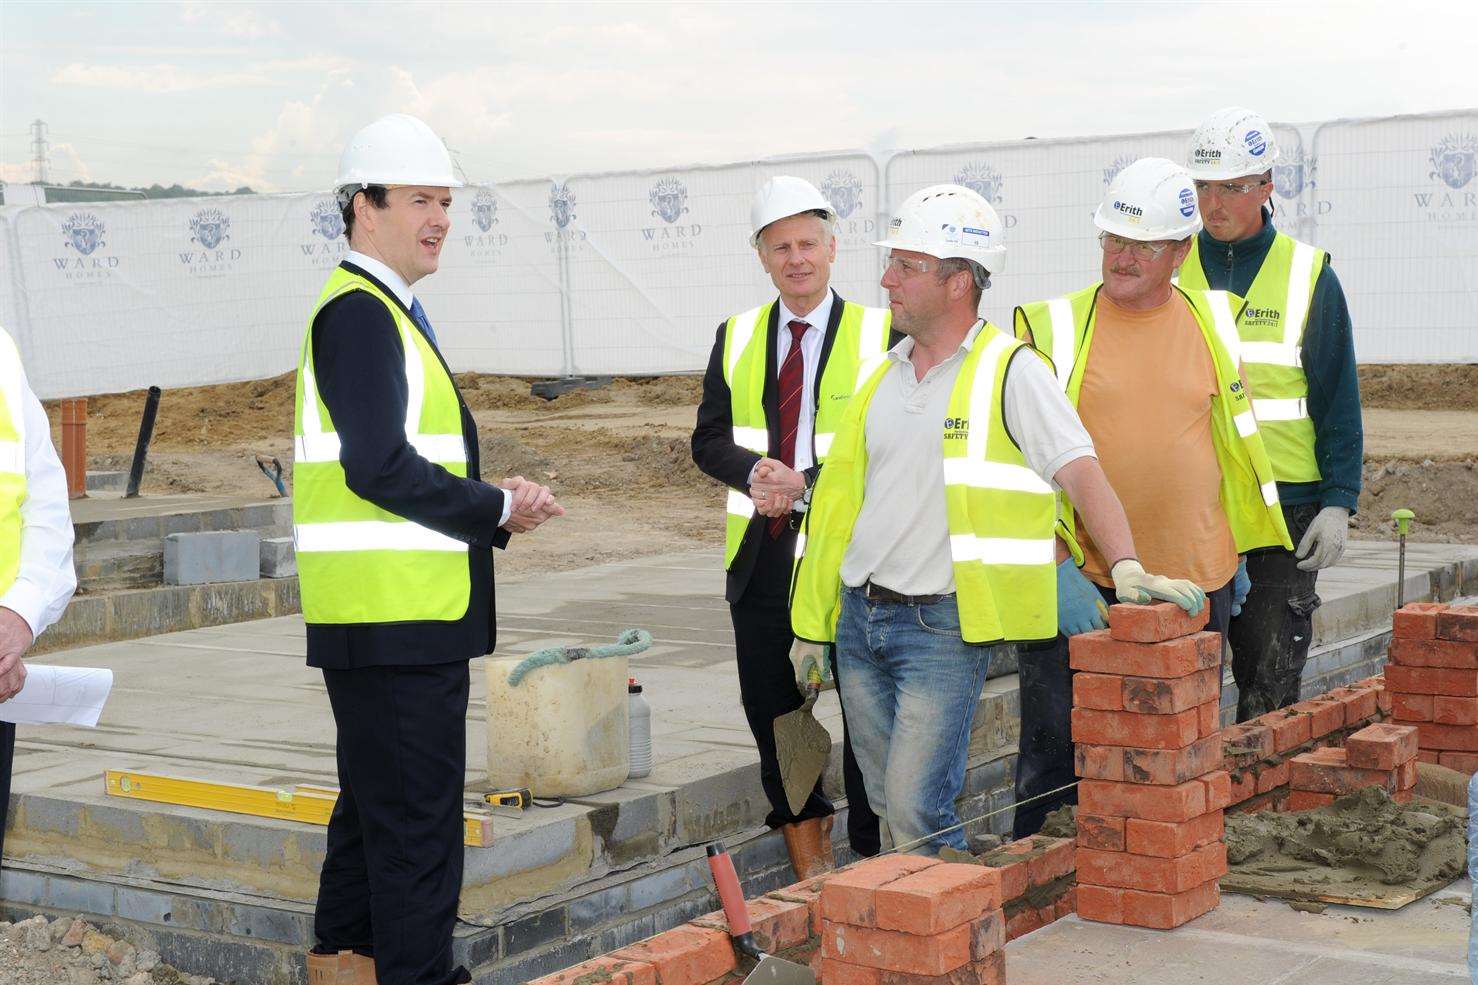 Surprise visit by chancellor George Osborne earlier this year off the back of the announcement that Ebbsfleet is to become a new garden city.